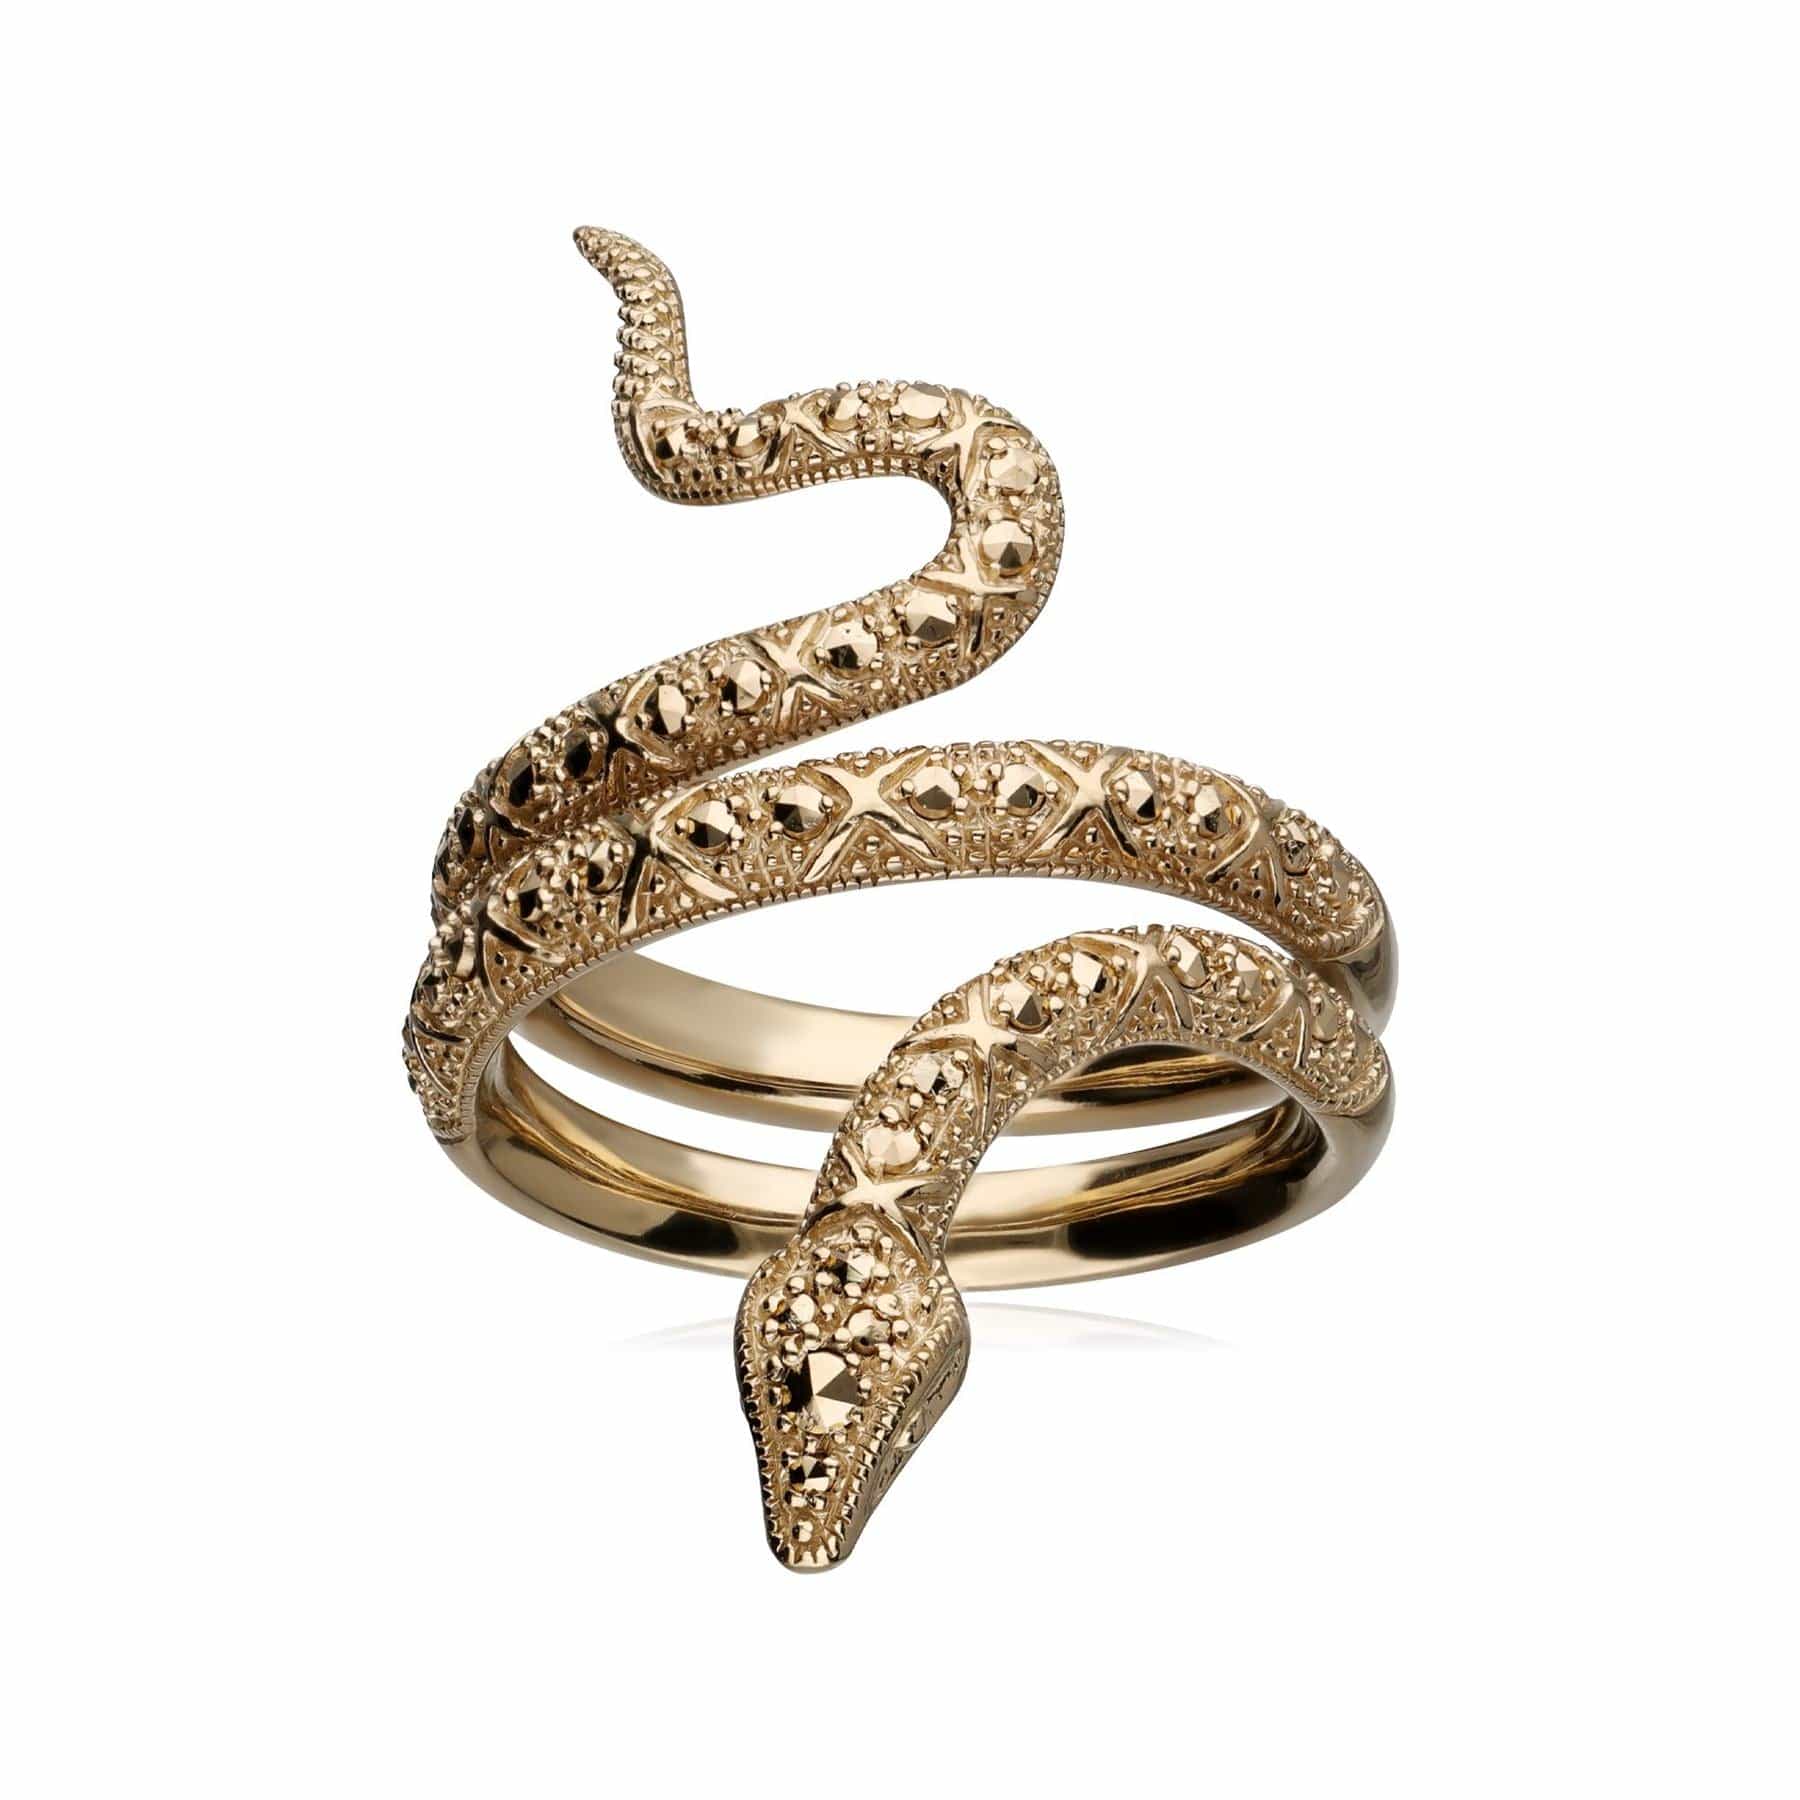 Image of Art Nouveau Marcasite Snake Wrap Ring in 18ct Gold Plated Silver